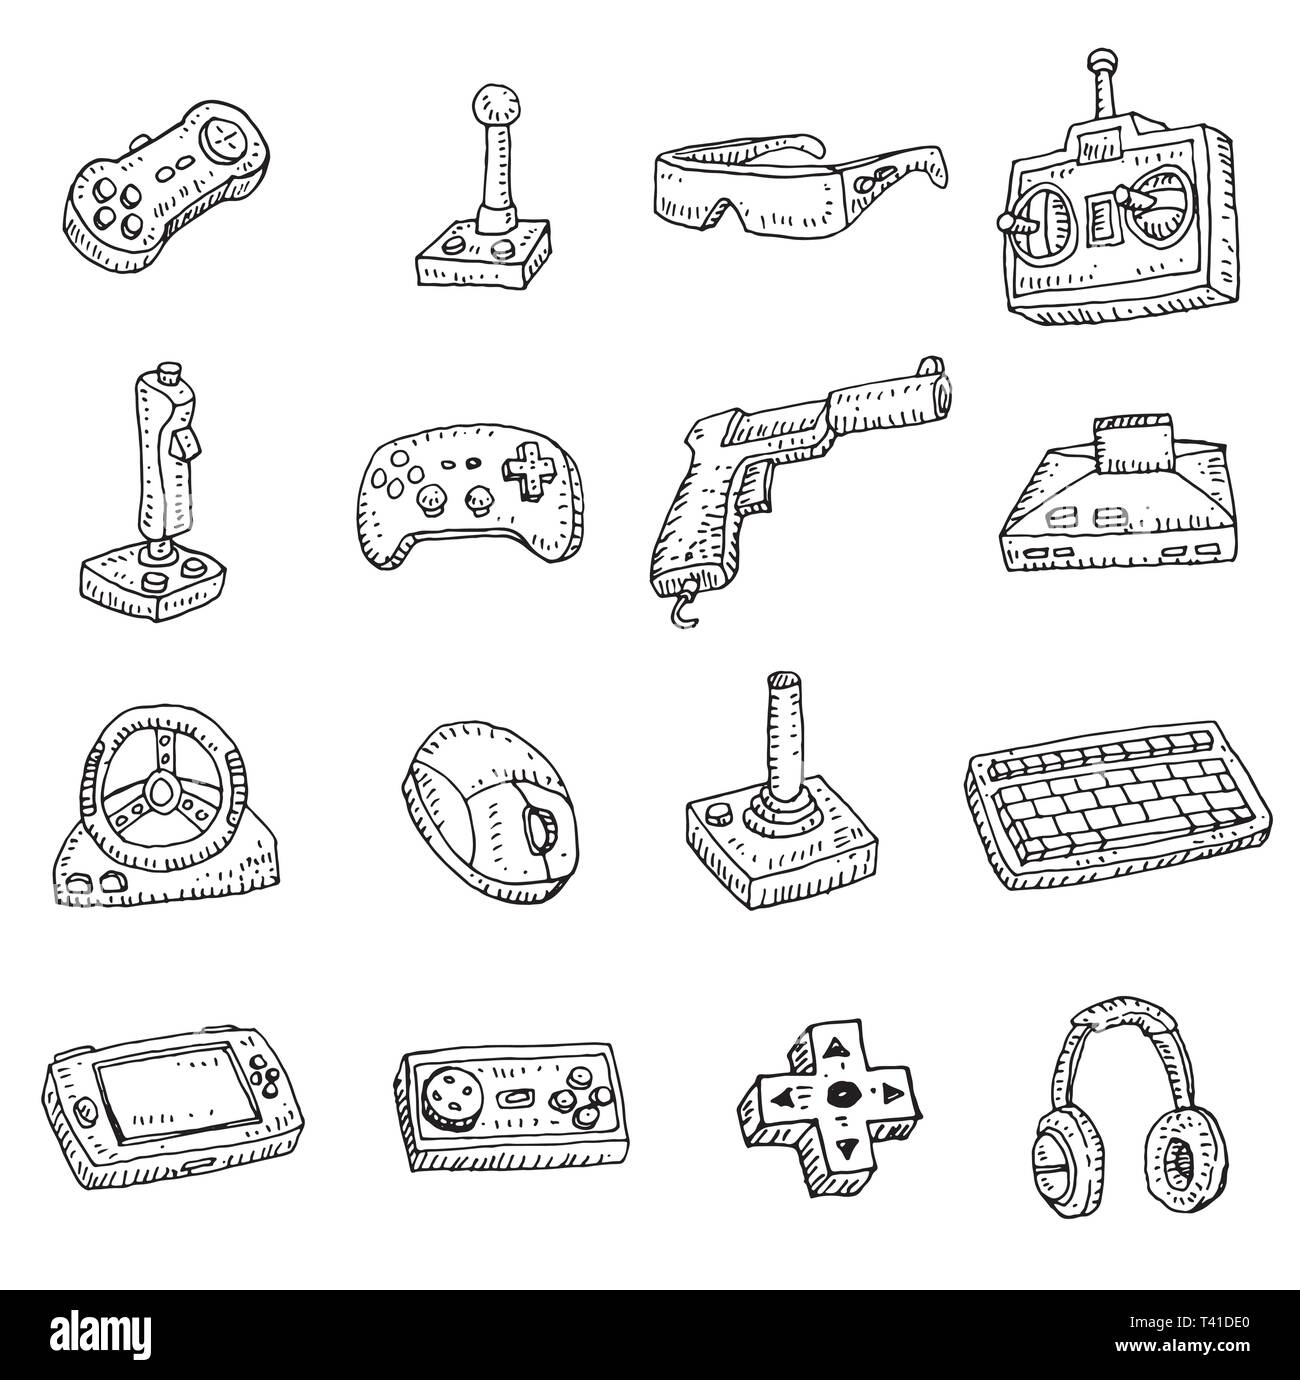 Doodle game icons set Royalty Free Vector Image